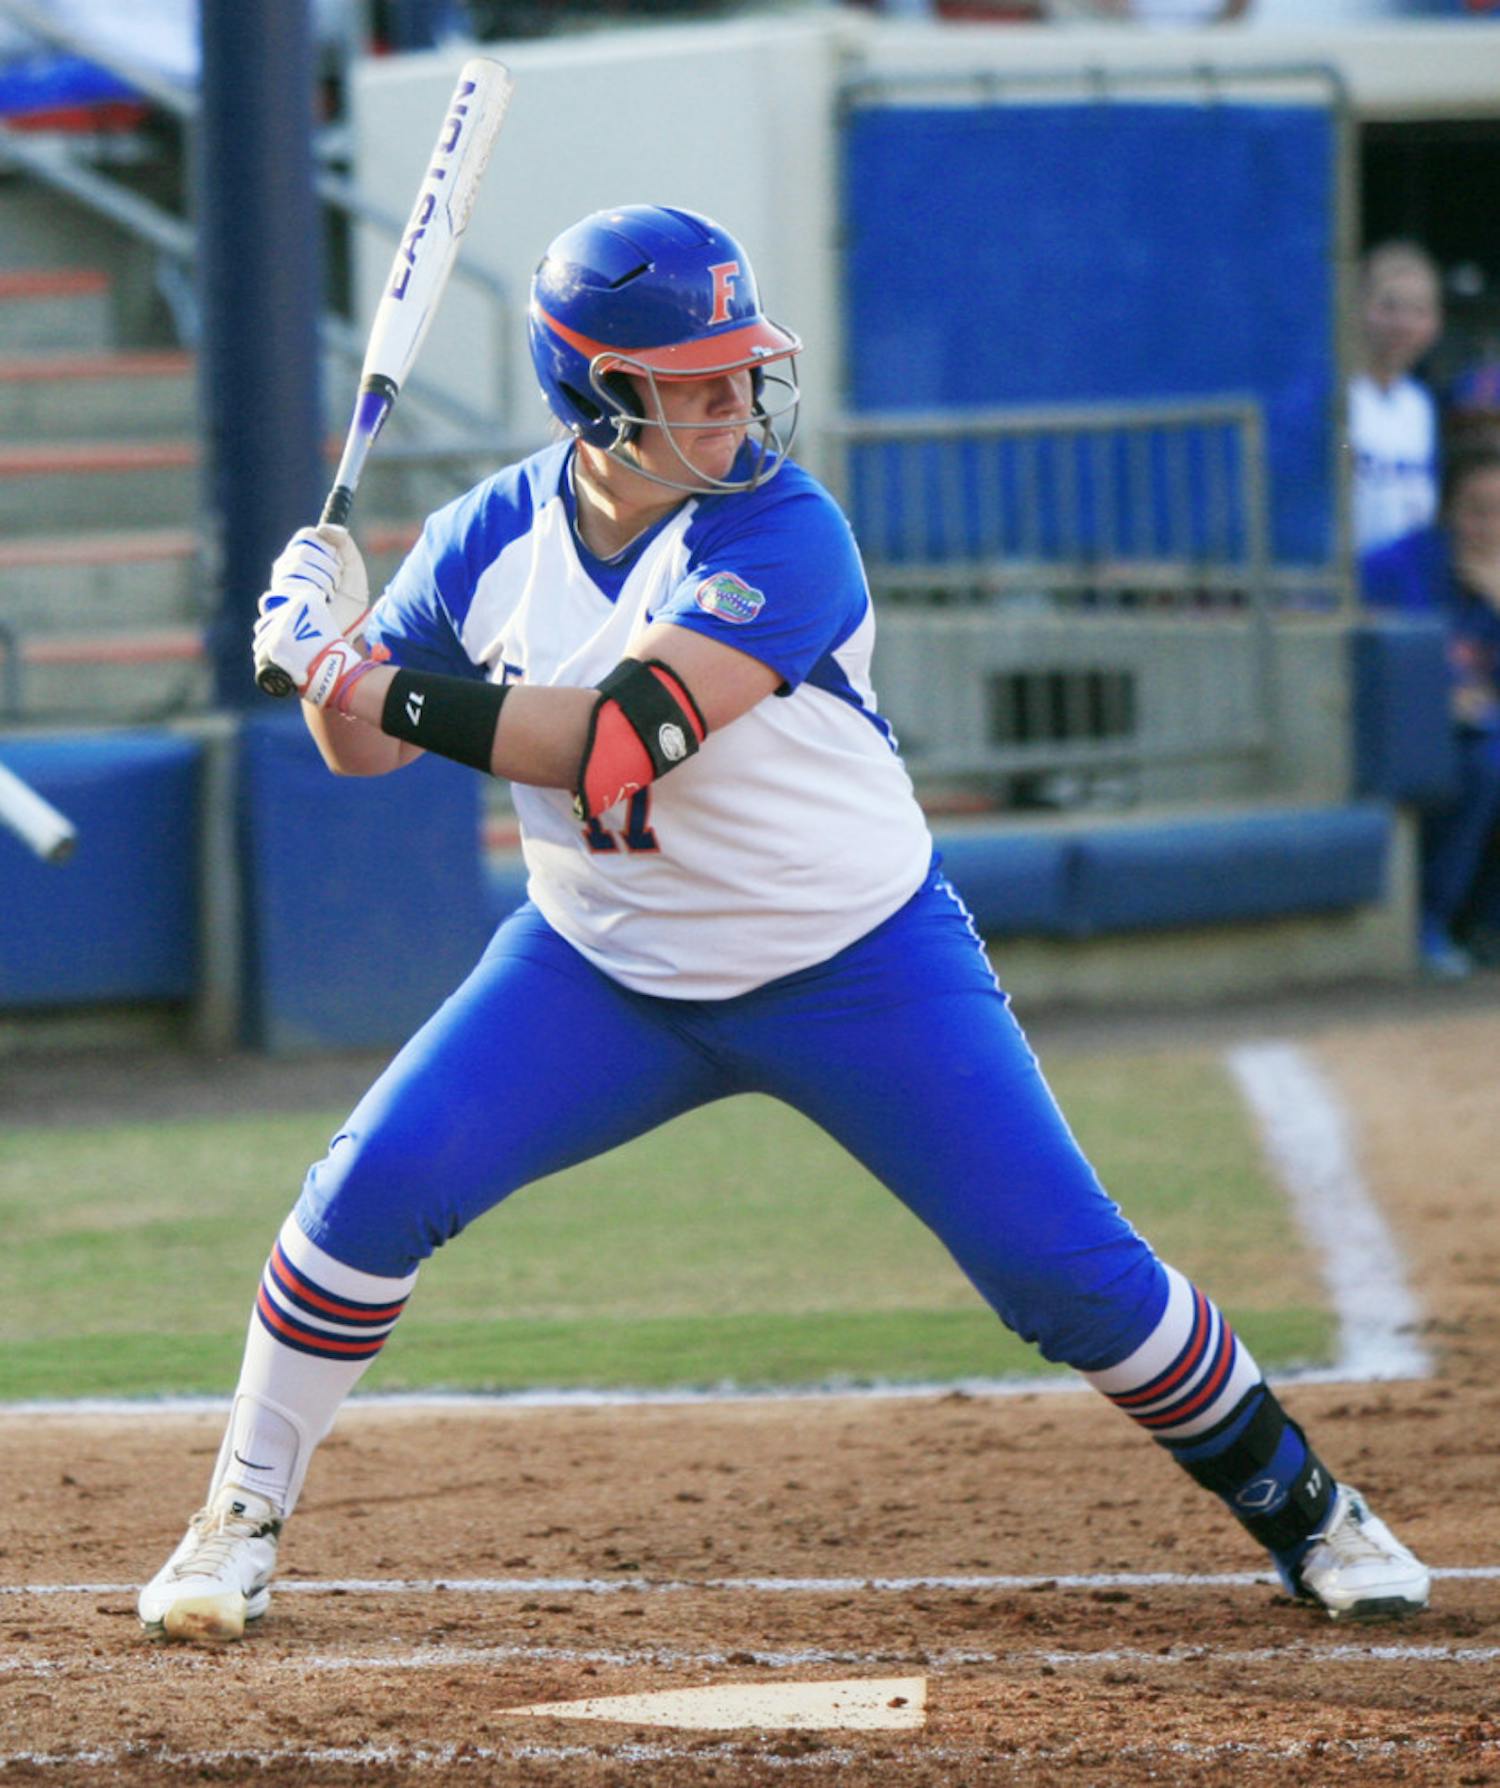 Lauren Haeger prepares to swing at the plate during Florida’s 6-5 win against Tennessee on March 15, 2013, at Katie Seashole Pressly Stadium.